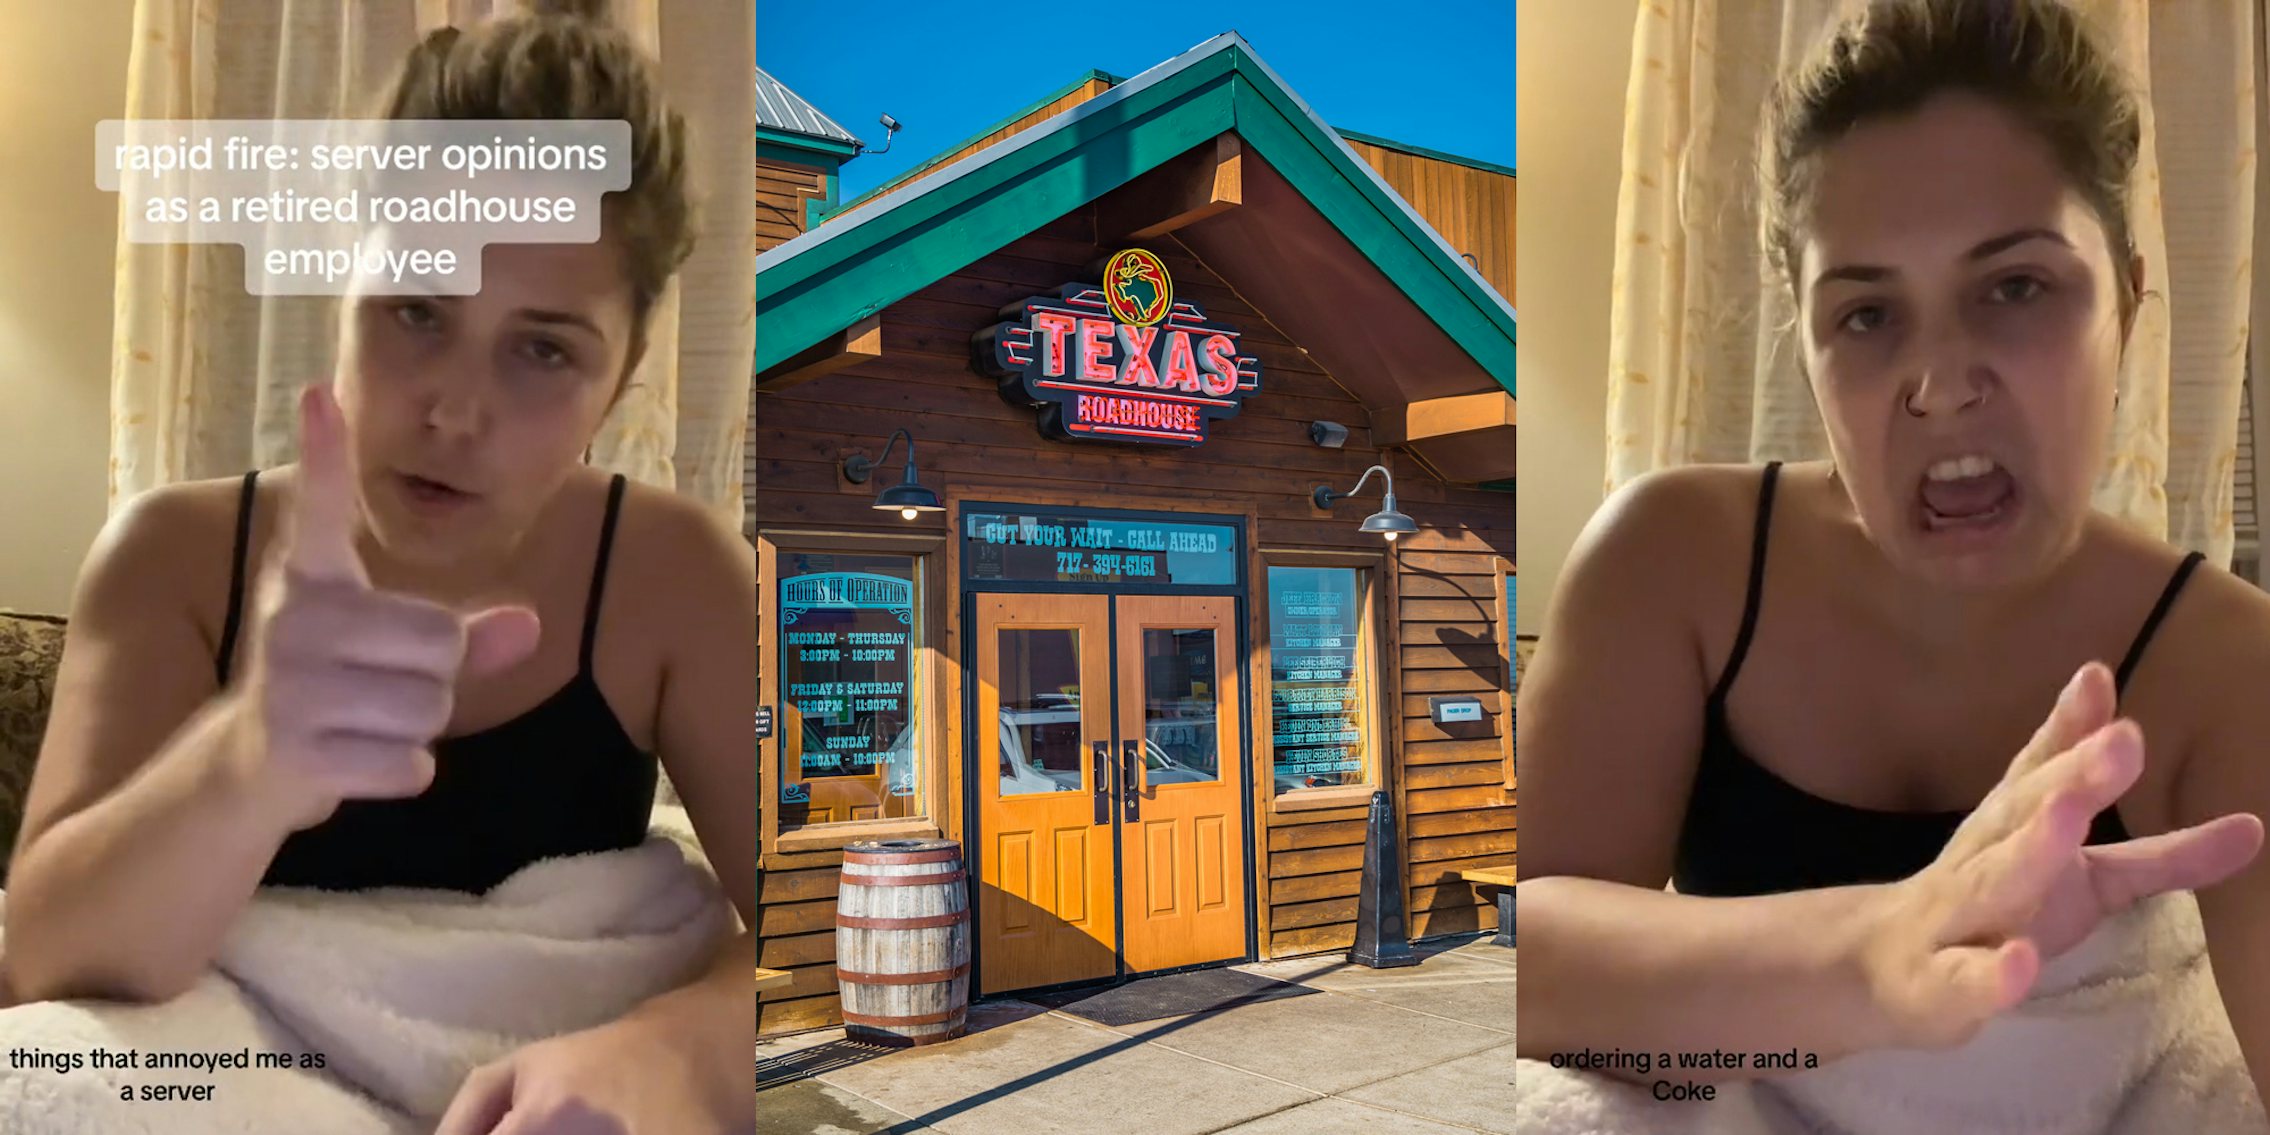 former Texas Roadhouse server speaking with caption 'rapid fire: server opinions as a retired roadhouse employee things that annoyed me as a server' (l) Texas Roadhouse entrance with sign (c) former Texas Roadhouse server speaking with caption 'ordering a water and a Coke' (r)